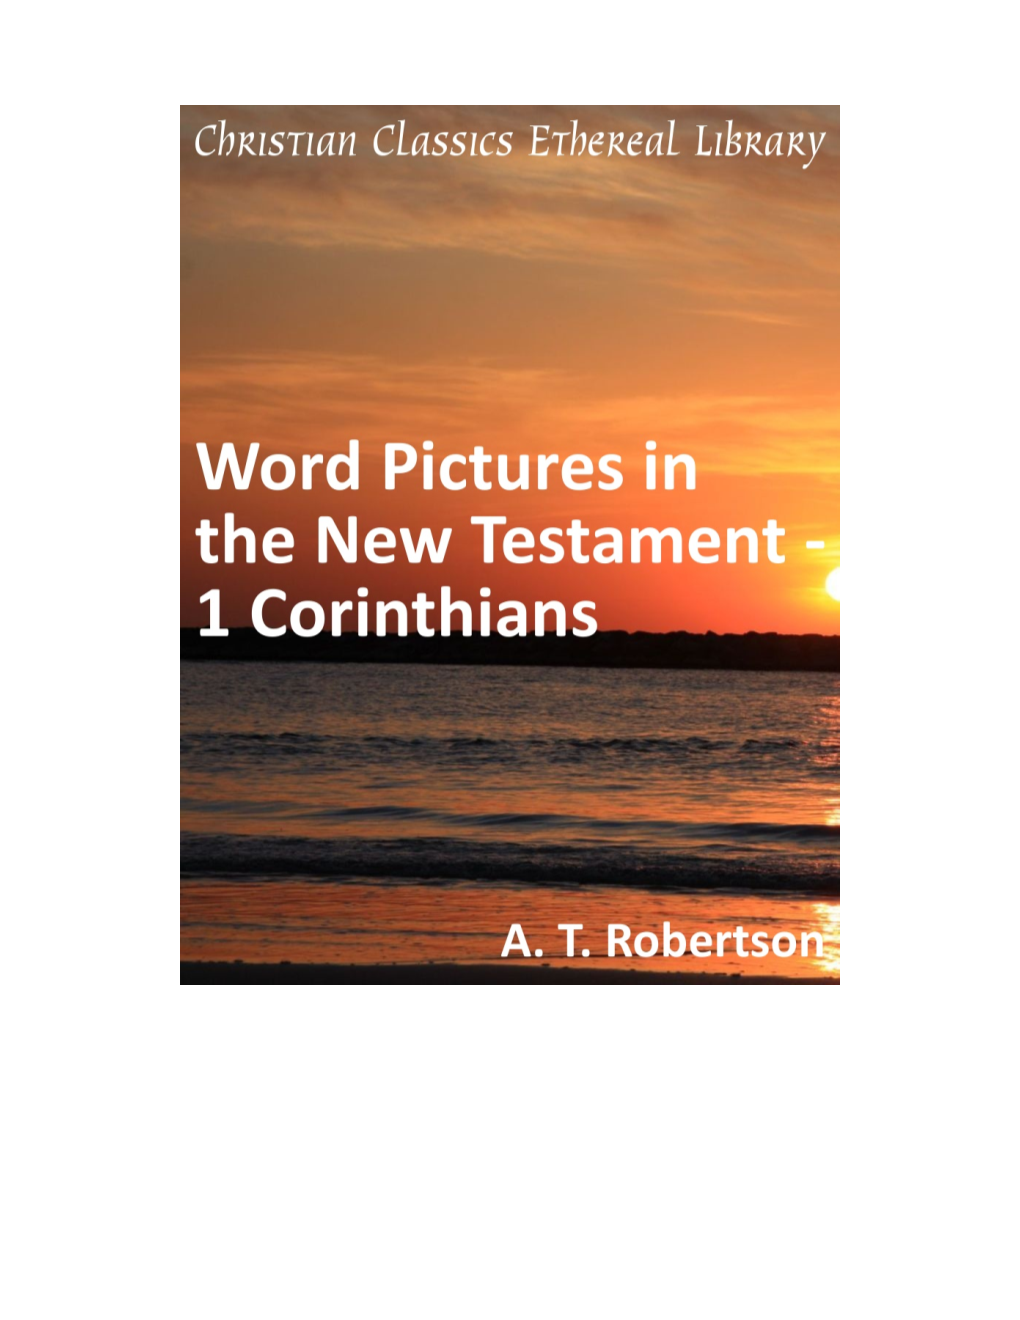 Word Pictures in the New Testament - 1 Corinthians